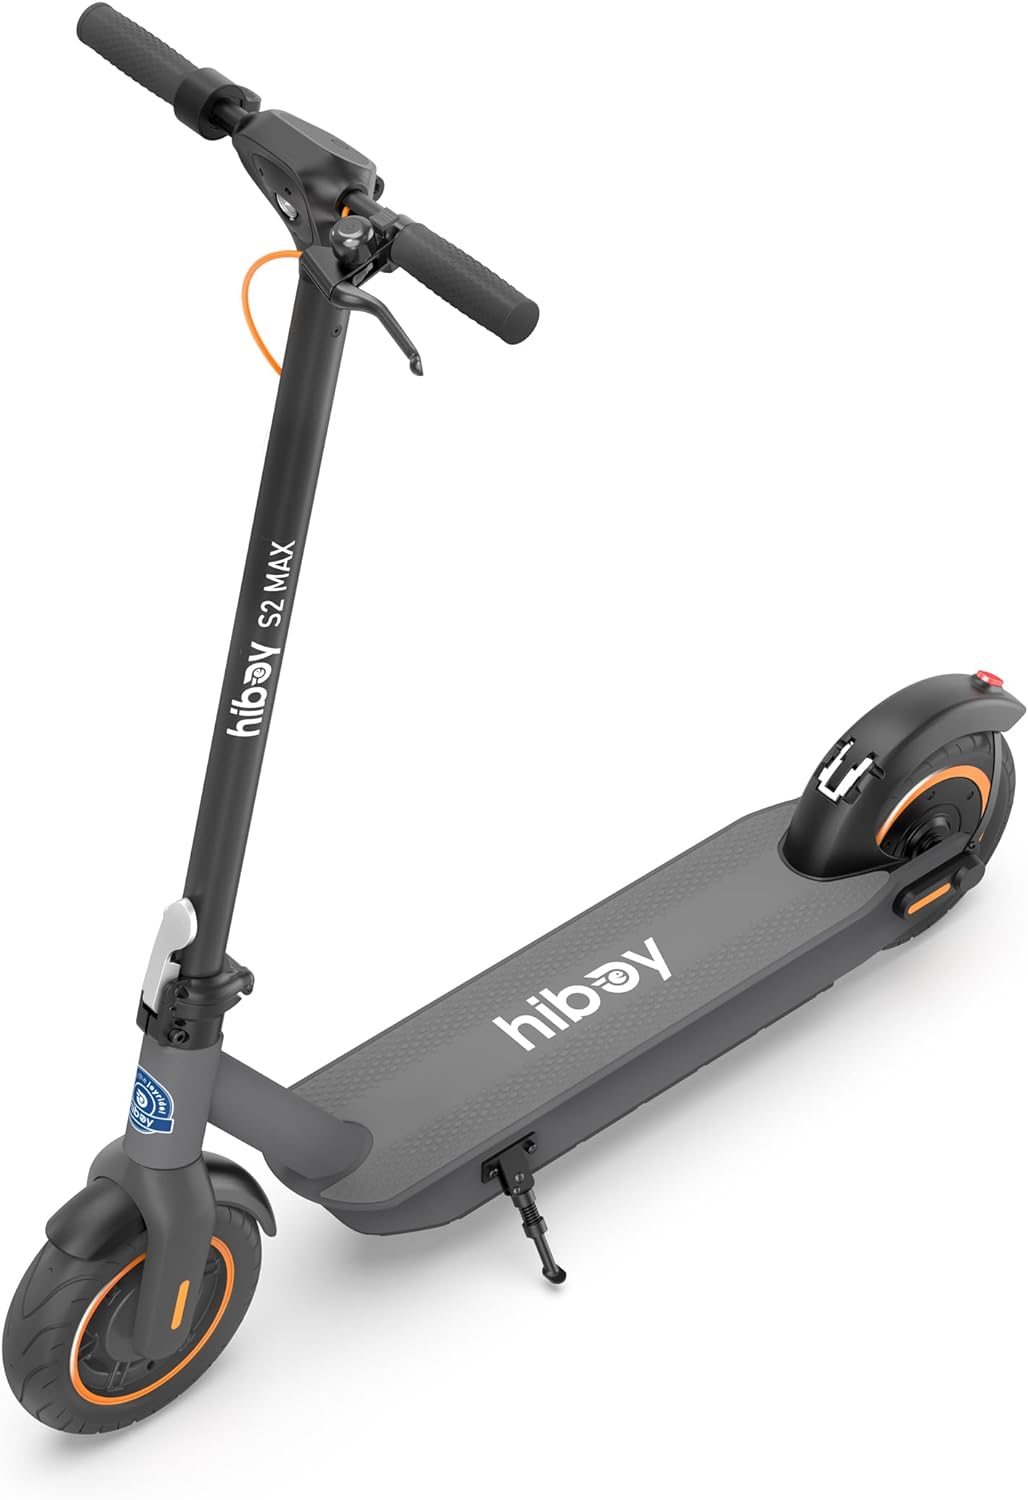 Hiboy S2 MAX Electric Scooter Review